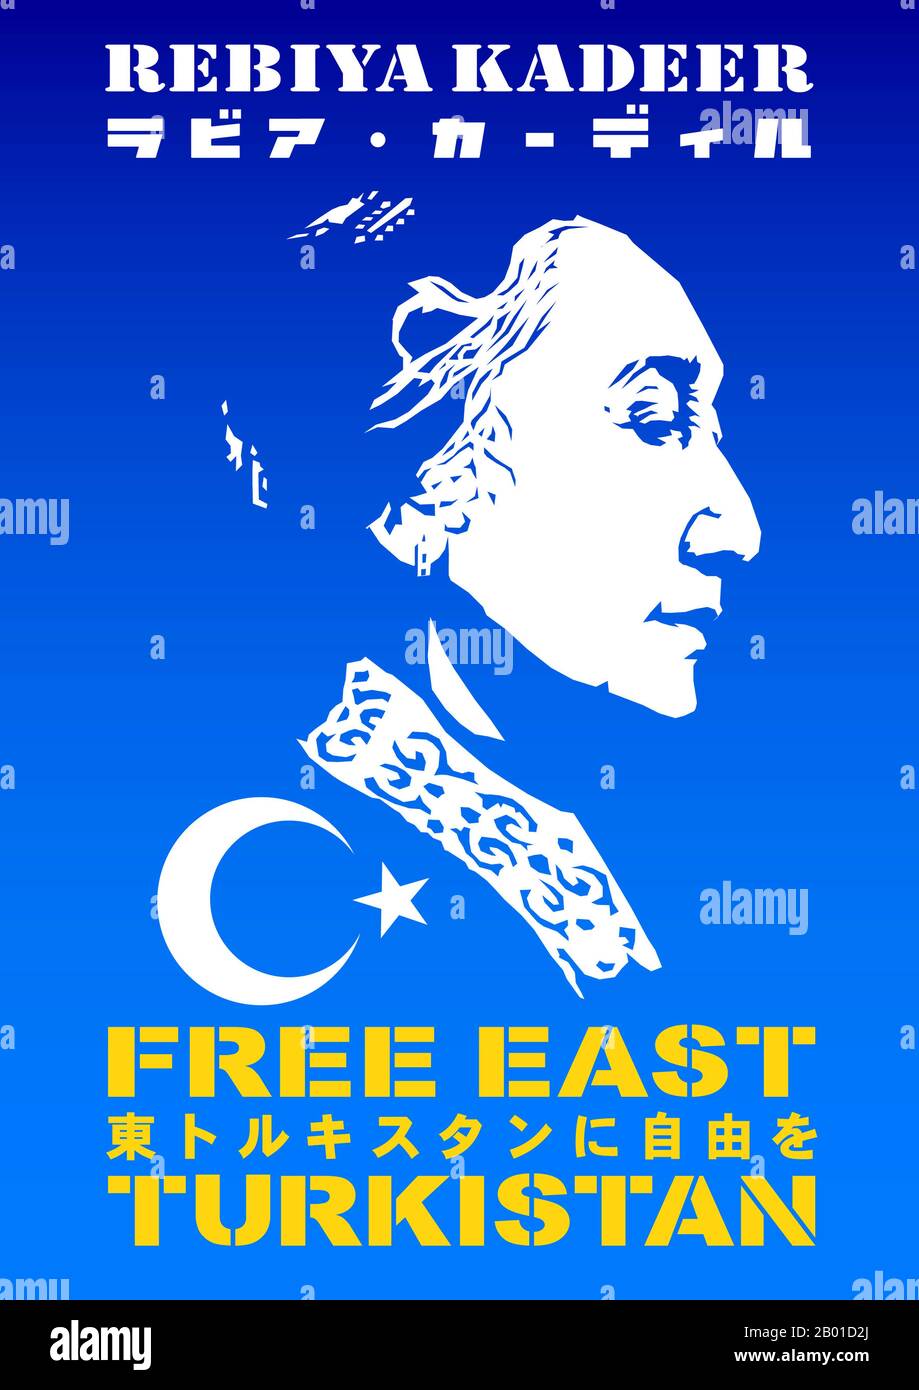 China: East Turkistan independence poster showing the blue-and-white separatist flag with a profile of the Uighur separatist leader Rebiya Kadeer superimposed.  Rebiya Kadeer (born 15 July 1948) is a prominent Uyghur businesswoman and political activist from the northwest region of Xinjiang Autonomous Region of the People's Republic of China (PRC). She has been the president of the World Uyghur Congress since November 2006.  Kadeer has been active in defending the rights of the largely Muslim Uyghur minority, who have been subject to systematic oppression by the Chinese government. Stock Photo